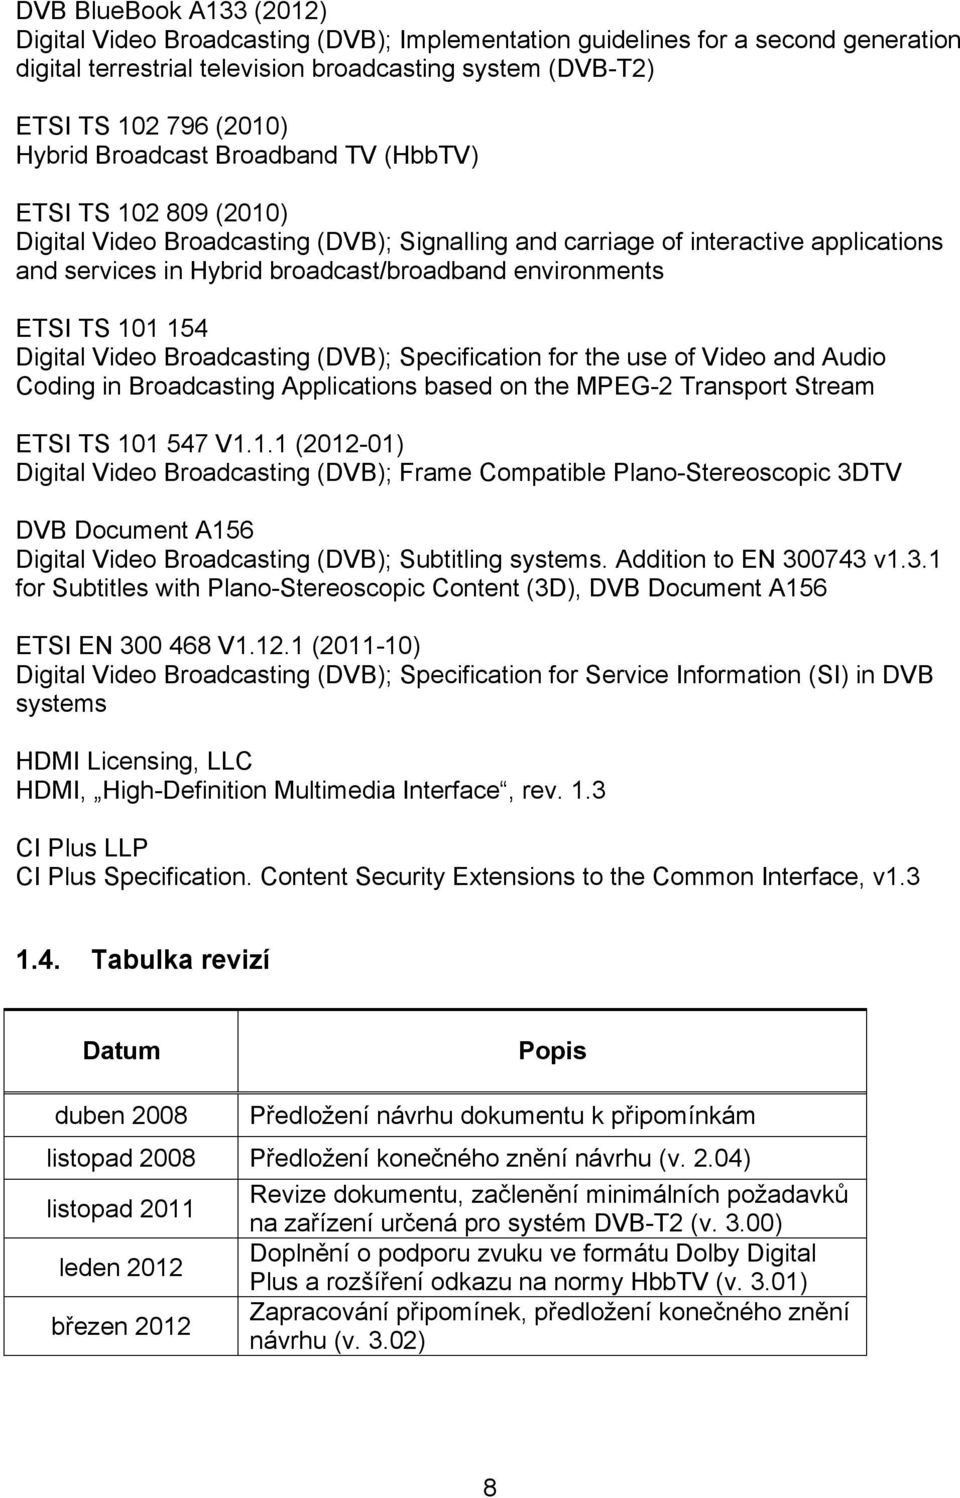 ETSI TS 101 154 Digital Video Broadcasting (DVB); Specification for the use of Video and Audio Coding in Broadcasting Applications based on the MPEG-2 Transport Stream ETSI TS 101 547 V1.1.1 (2012-01) Digital Video Broadcasting (DVB); Frame Compatible Plano-Stereoscopic 3DTV DVB Document A156 Digital Video Broadcasting (DVB); Subtitling systems.